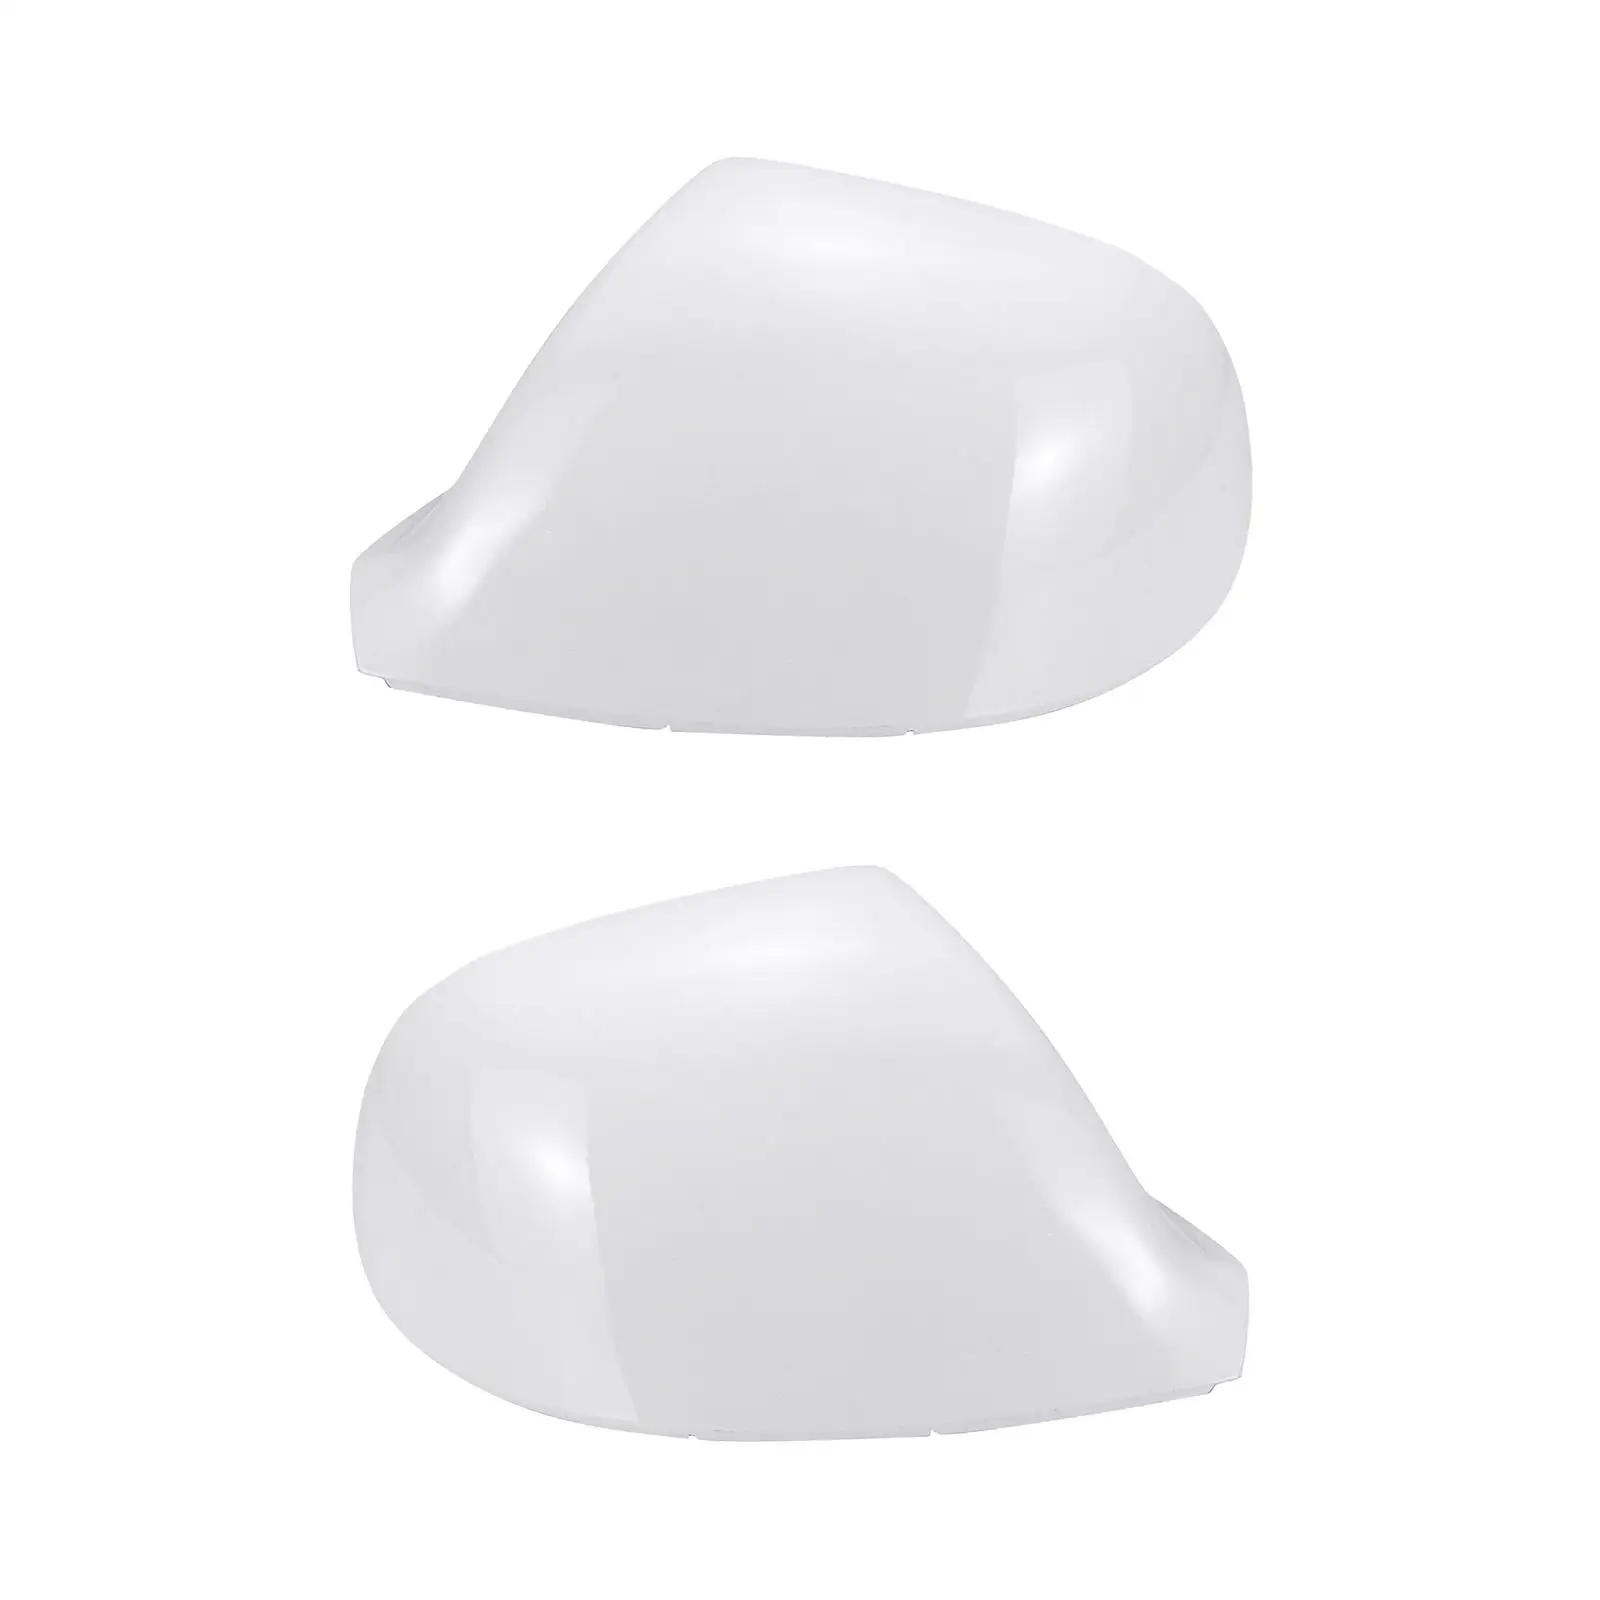 Side Wing Mirror Cover Cap for Transporter Replacement Accessory